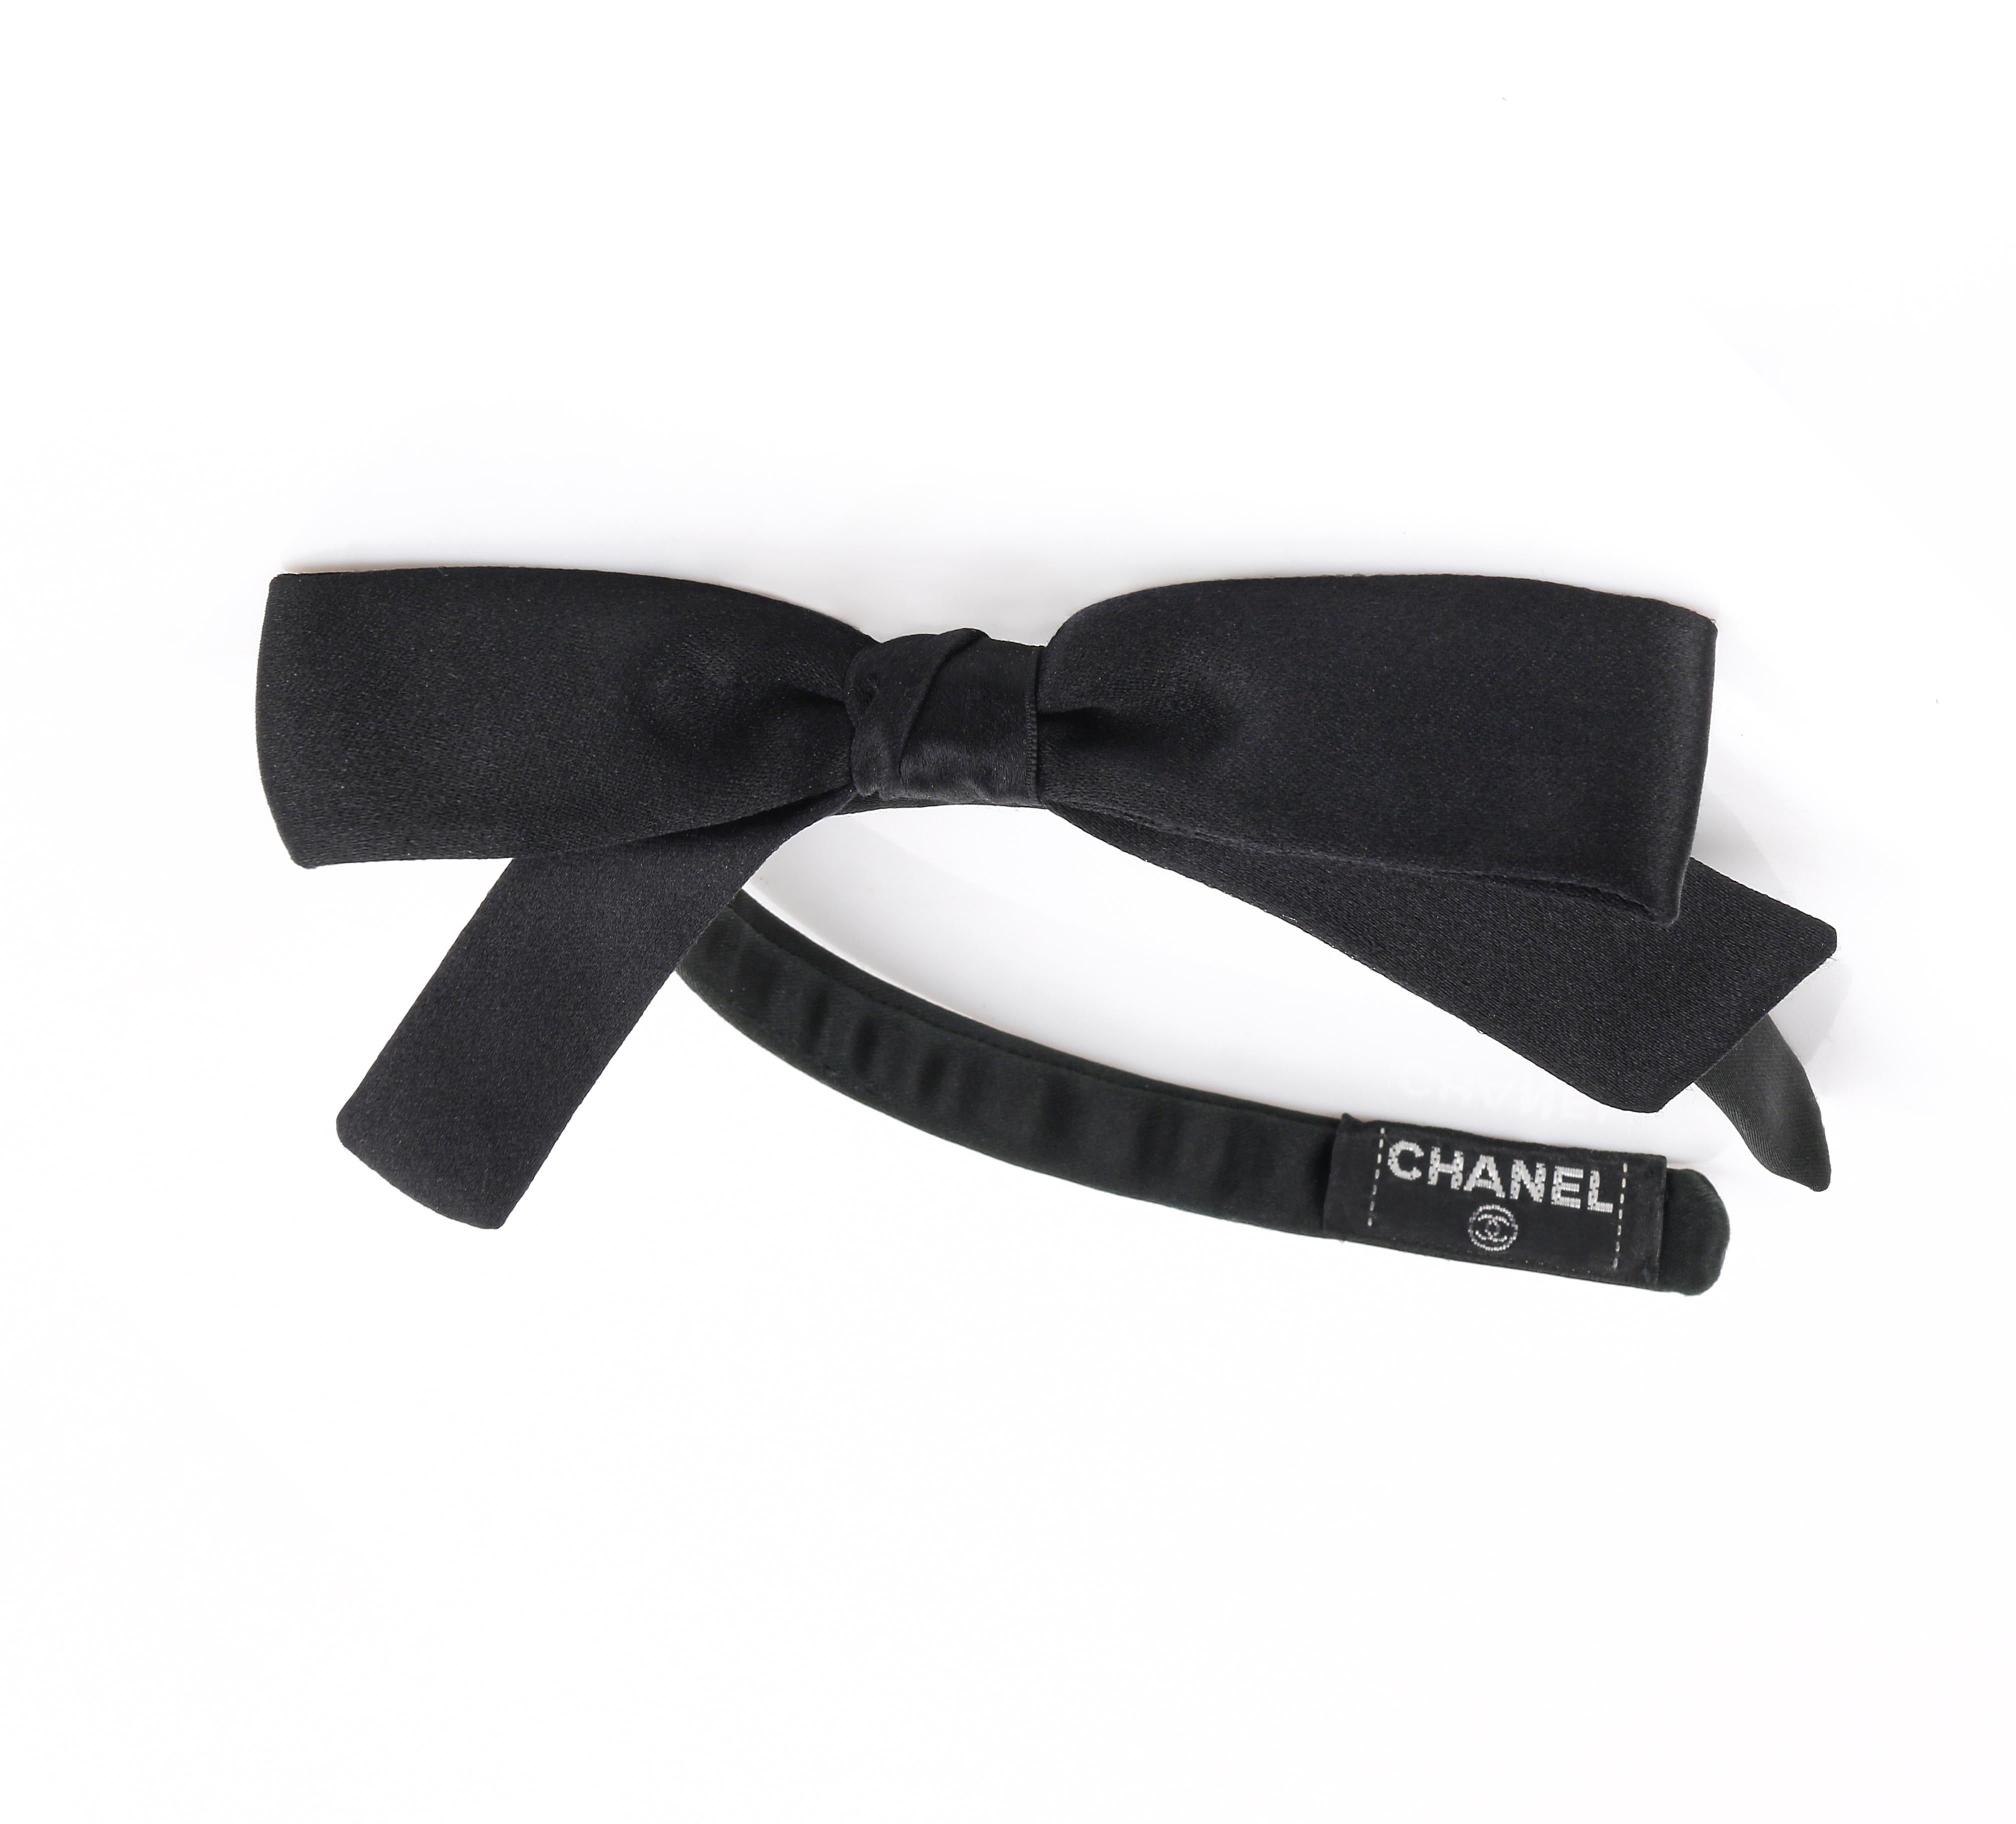 CHANEL Black Satin Silk Narrow Classic Bow Covered Structured Headband Headpiece
 
Brand/Manufacturer: Chanel
Style: Headband 
Color(s): Black
Lined: No
Unmarked Fabric Content (feel of): Exterior: Silk Satin; Interior Structure: Plastic
Additional